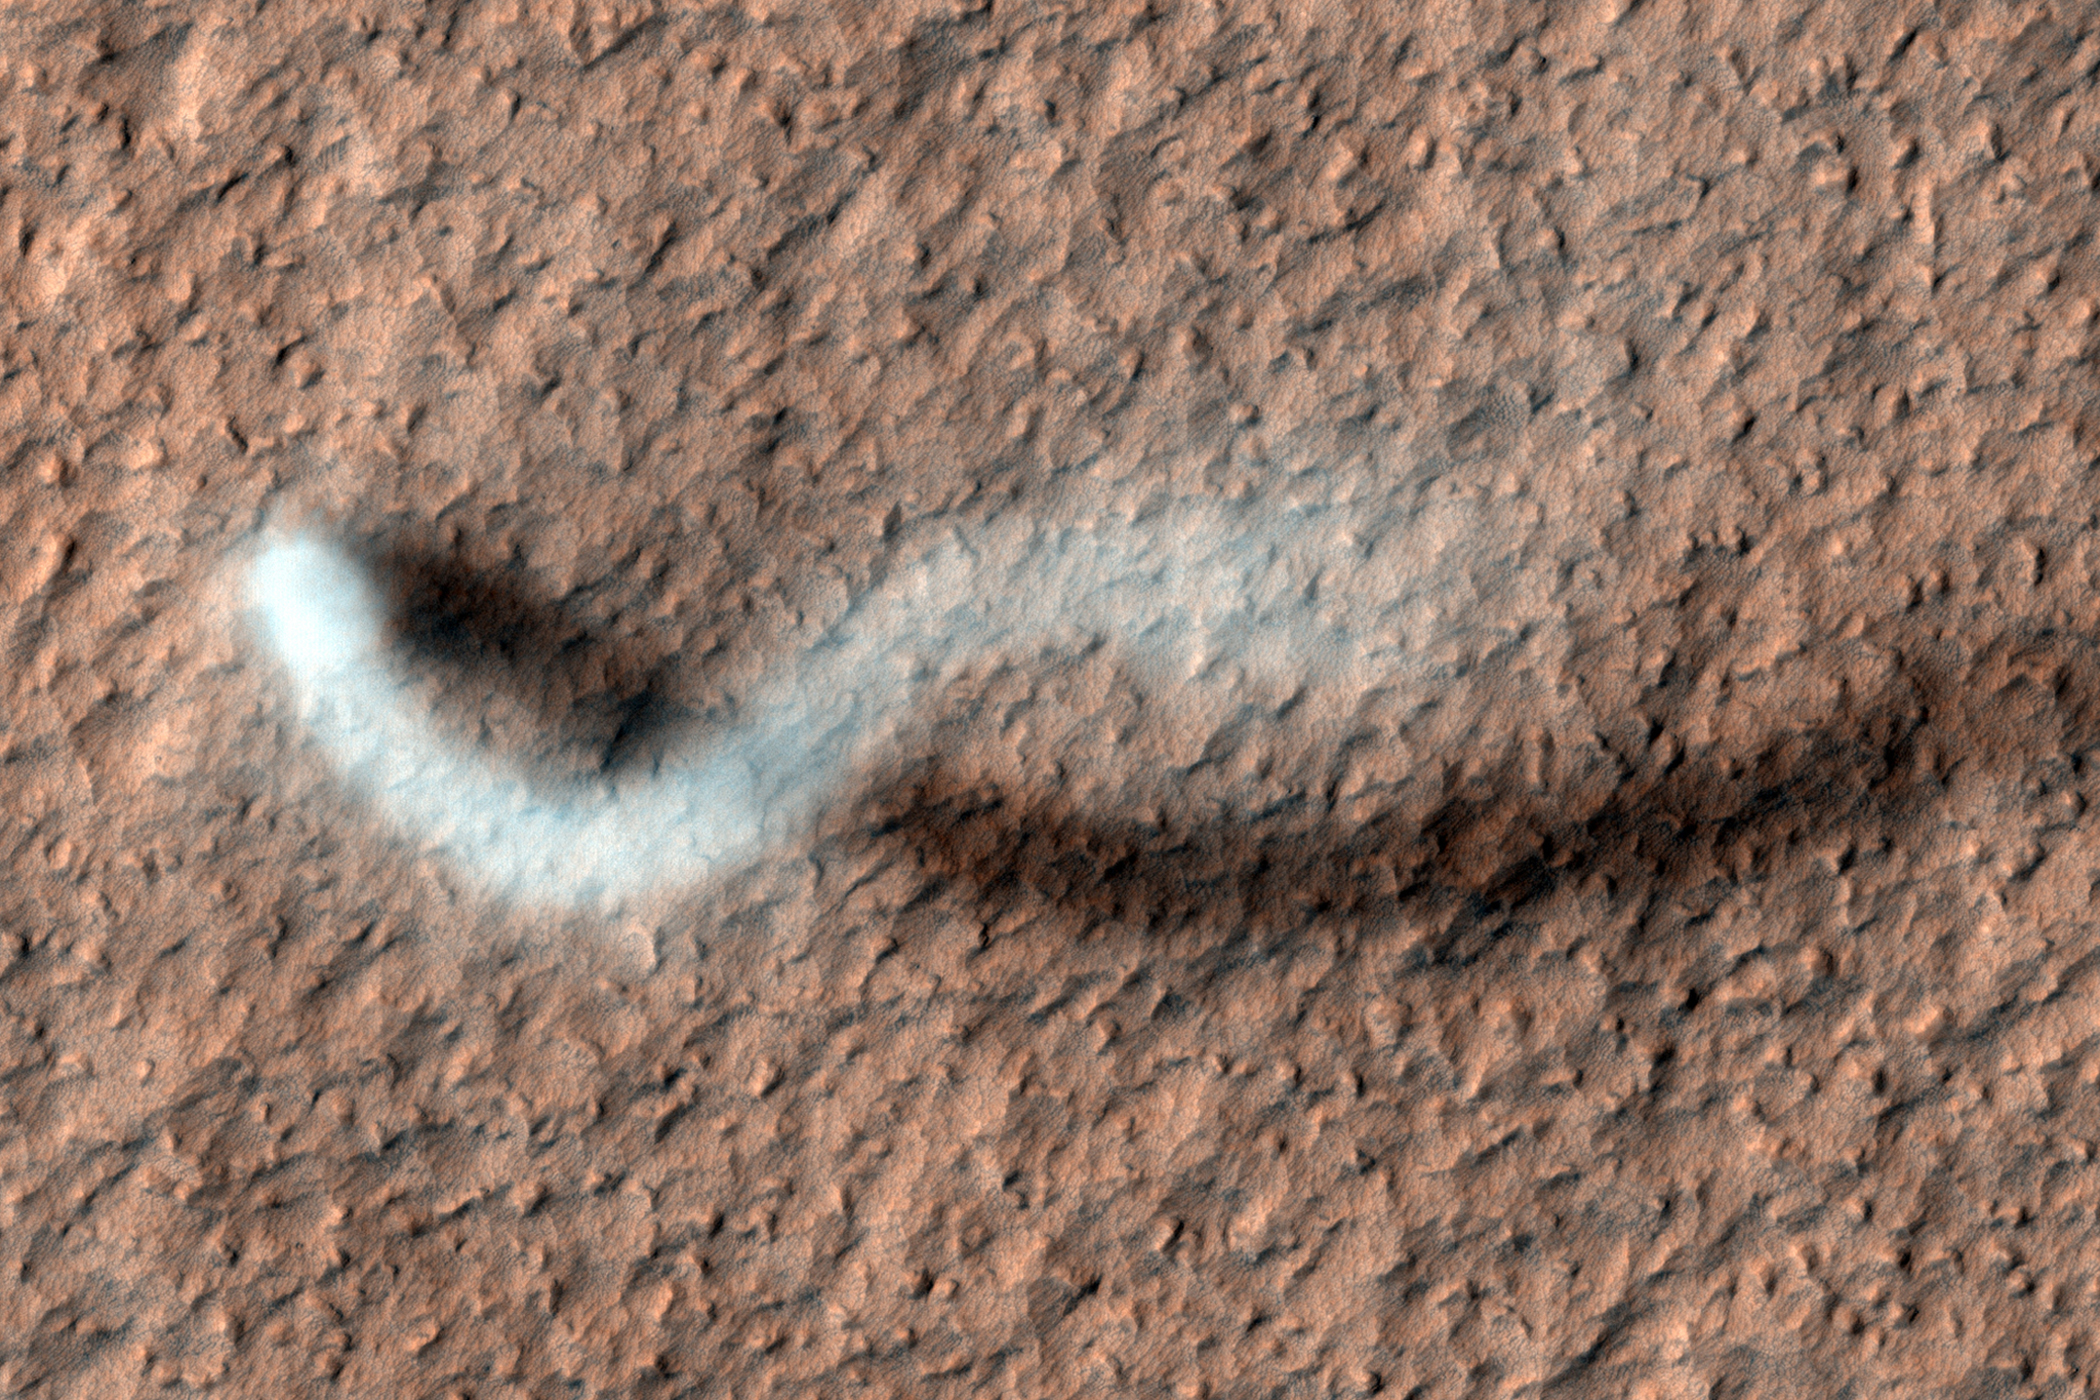 A towering dust devil casts a serpentine shadow over the Martian surface in this stunning, late springtime image of Amazonis Planitia. The length of the shadow indicates that the dust plume reaches more than 800 meters, or half a mile, in height.